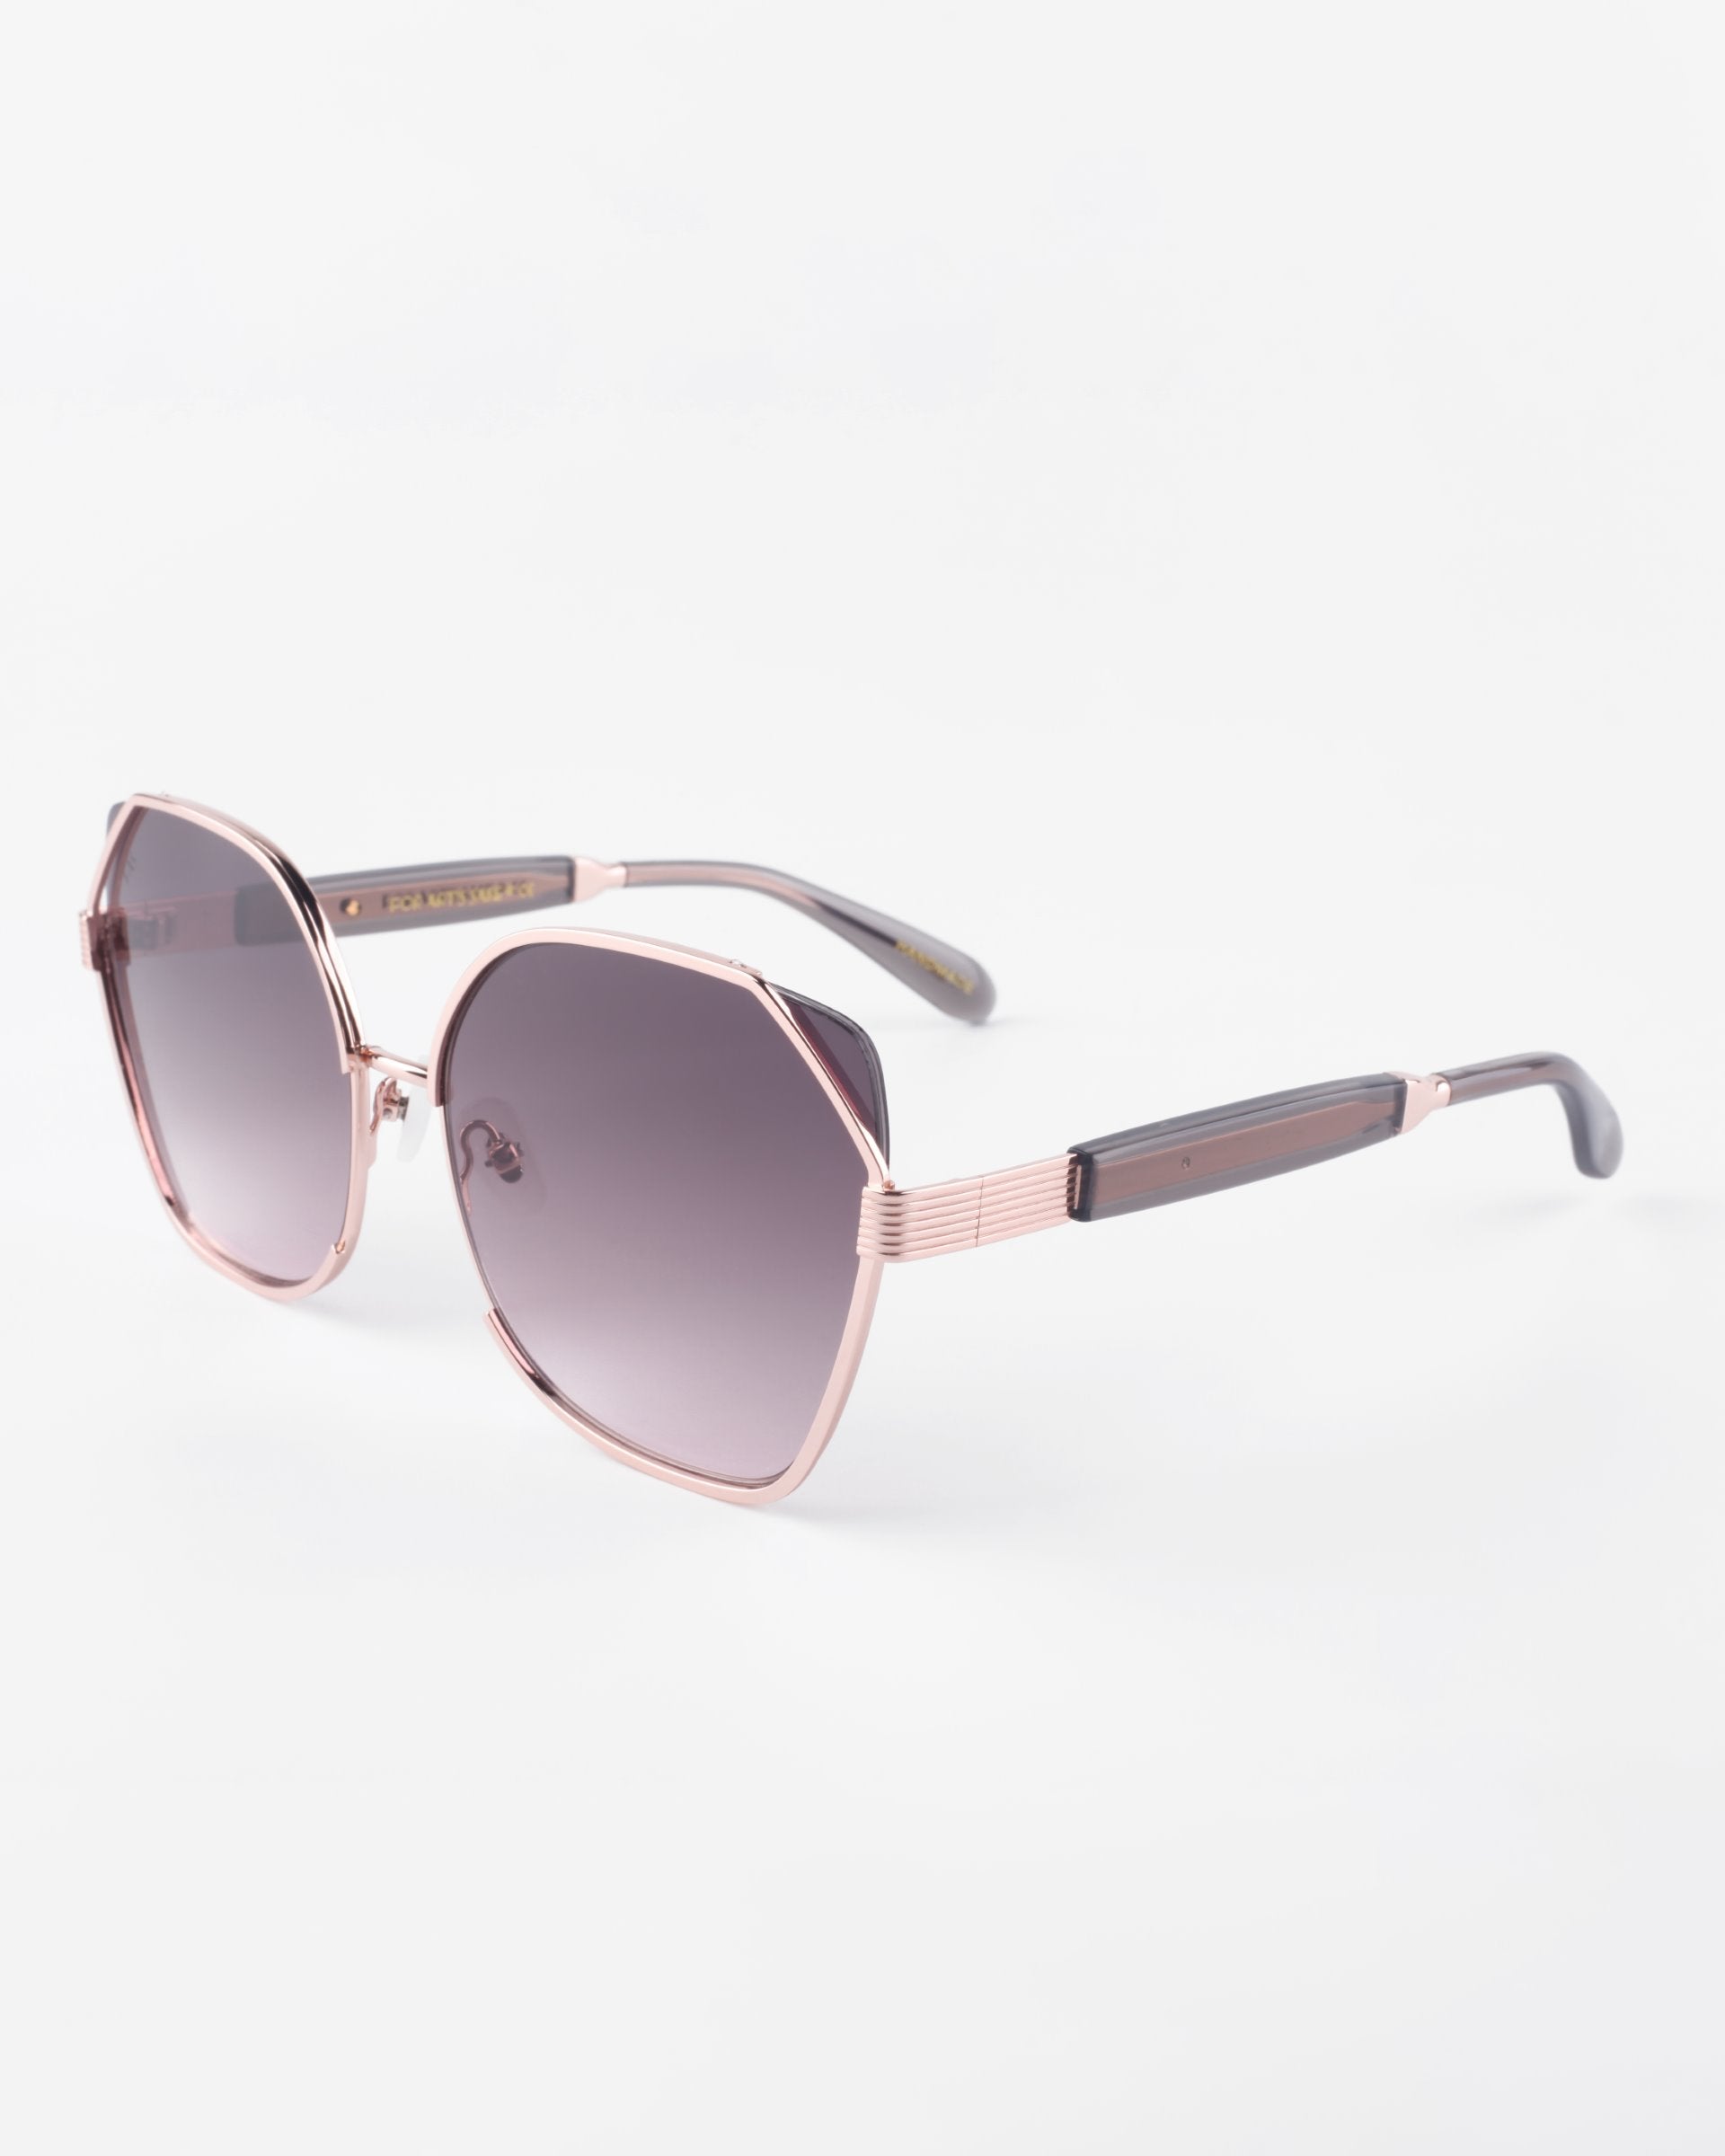 A pair of stylish Montage sunglasses from For Art&#39;s Sake® with a rose gold frame and gradient dark lenses, offering 100% UVA &amp; UVB protection. The glasses have geometric, slightly squared lenses and sleek arms with dark tips. Made from gold-plated stainless steel, their design is modern and elegant. The background is plain white.